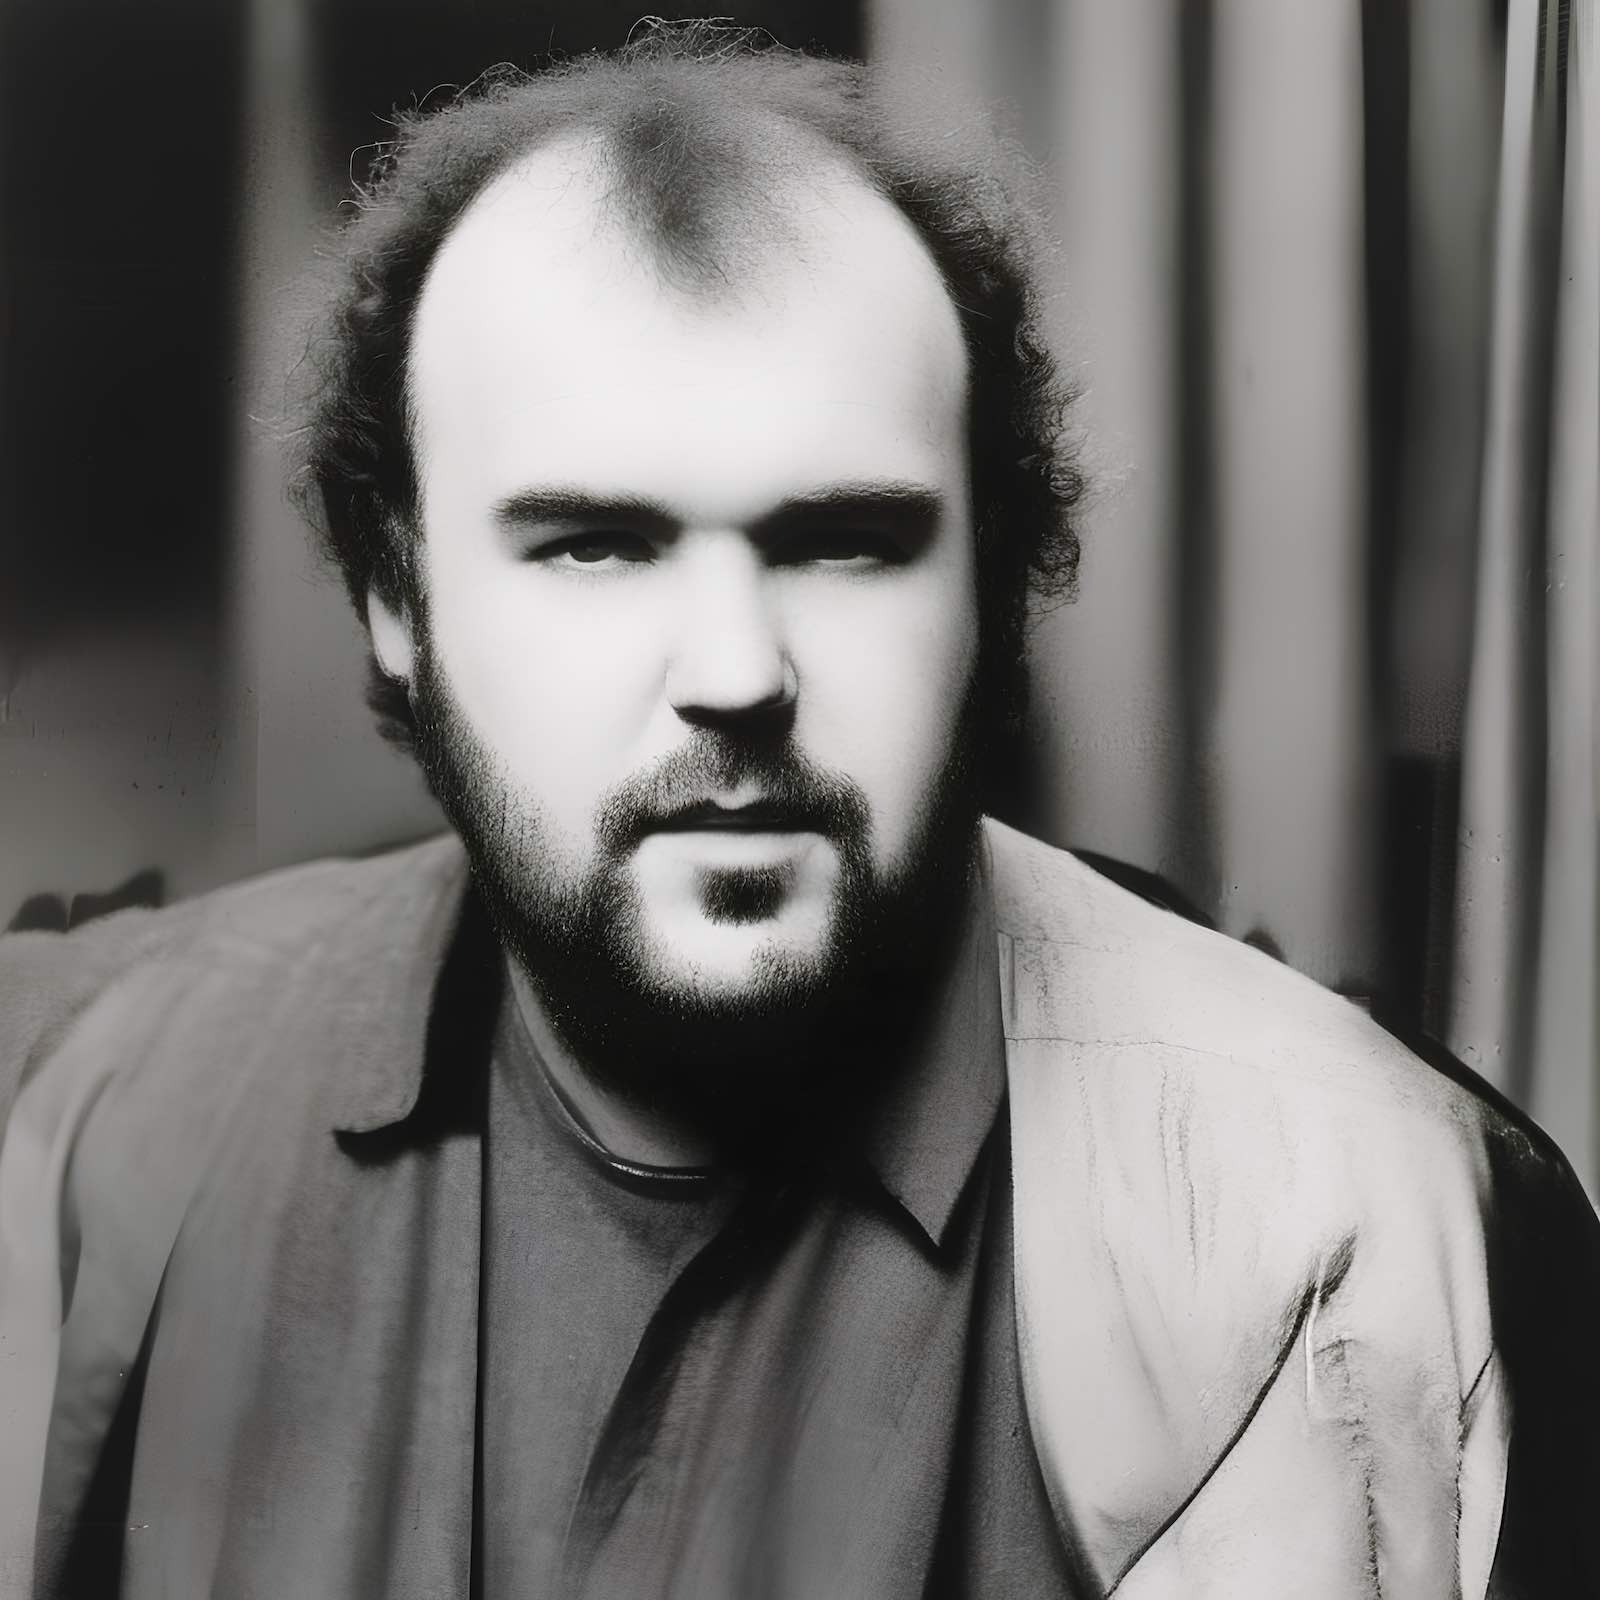 john martyn ai - Radio Clash Podcast John Martyn tribute album - Robert Smith does 'Small Hours' Radio Clash Music Mashup Podcast brings you the best in eclectic tunes, mashups and remixes from around the world. Since 2004, we've been bringing you the freshest and most innovative music from a diverse range of genres and cultures. Join us on our musical journey as we explore the sounds of yesterday, today, and tomorrow. Discover new music and be inspired by the mashup of musical styles that only Radio Clash can provide. Subscribe now to elevate your musical experience!